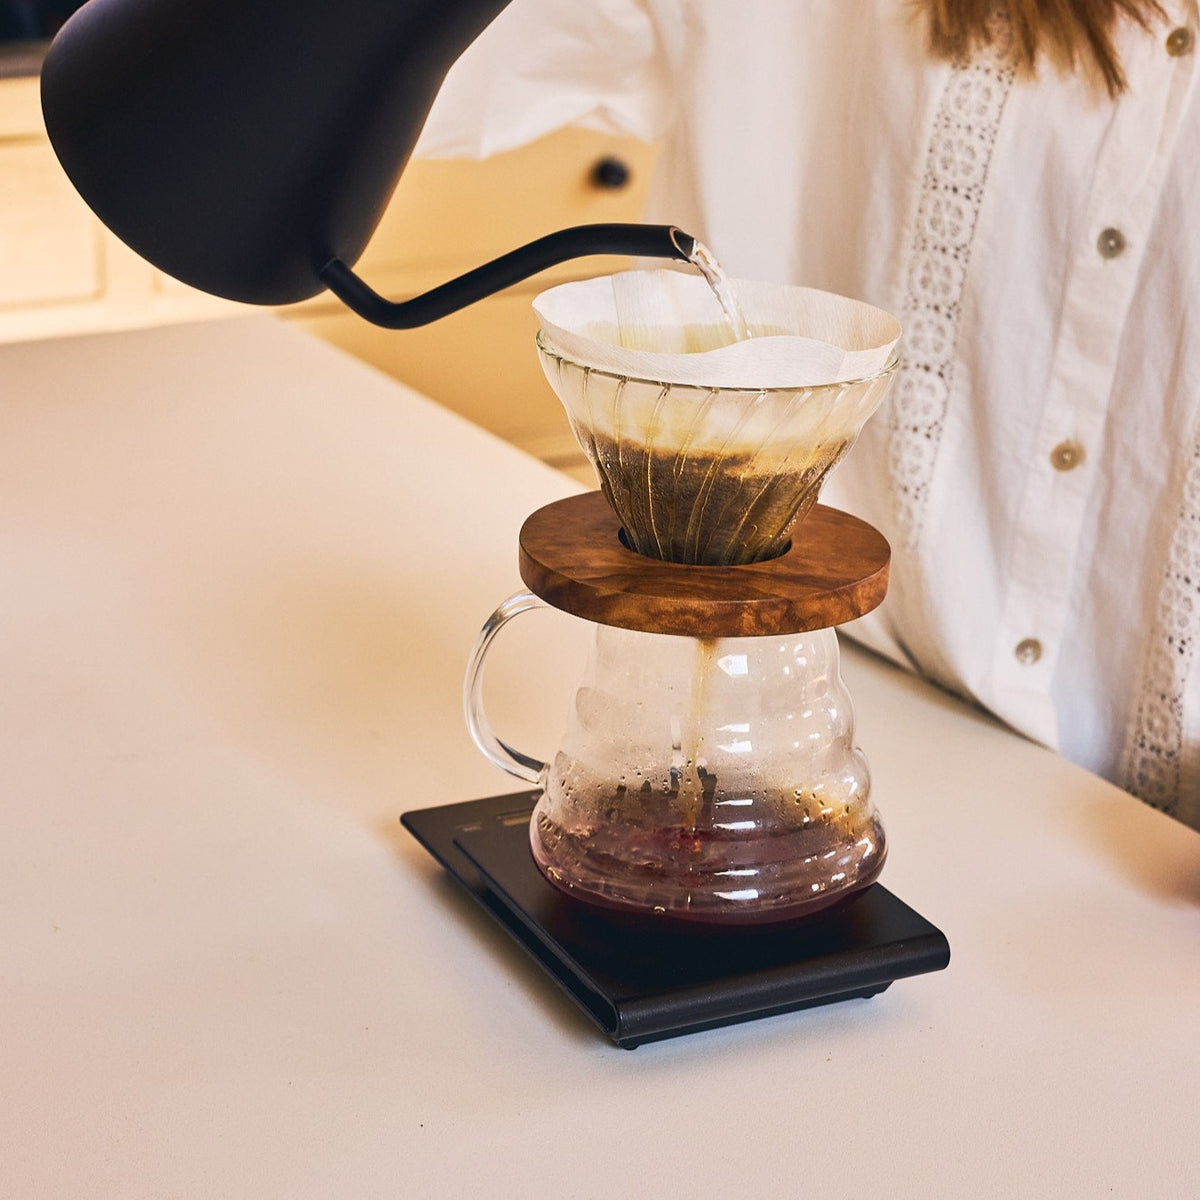 Hario V60 Drip Scale Review [Read Before Buying]